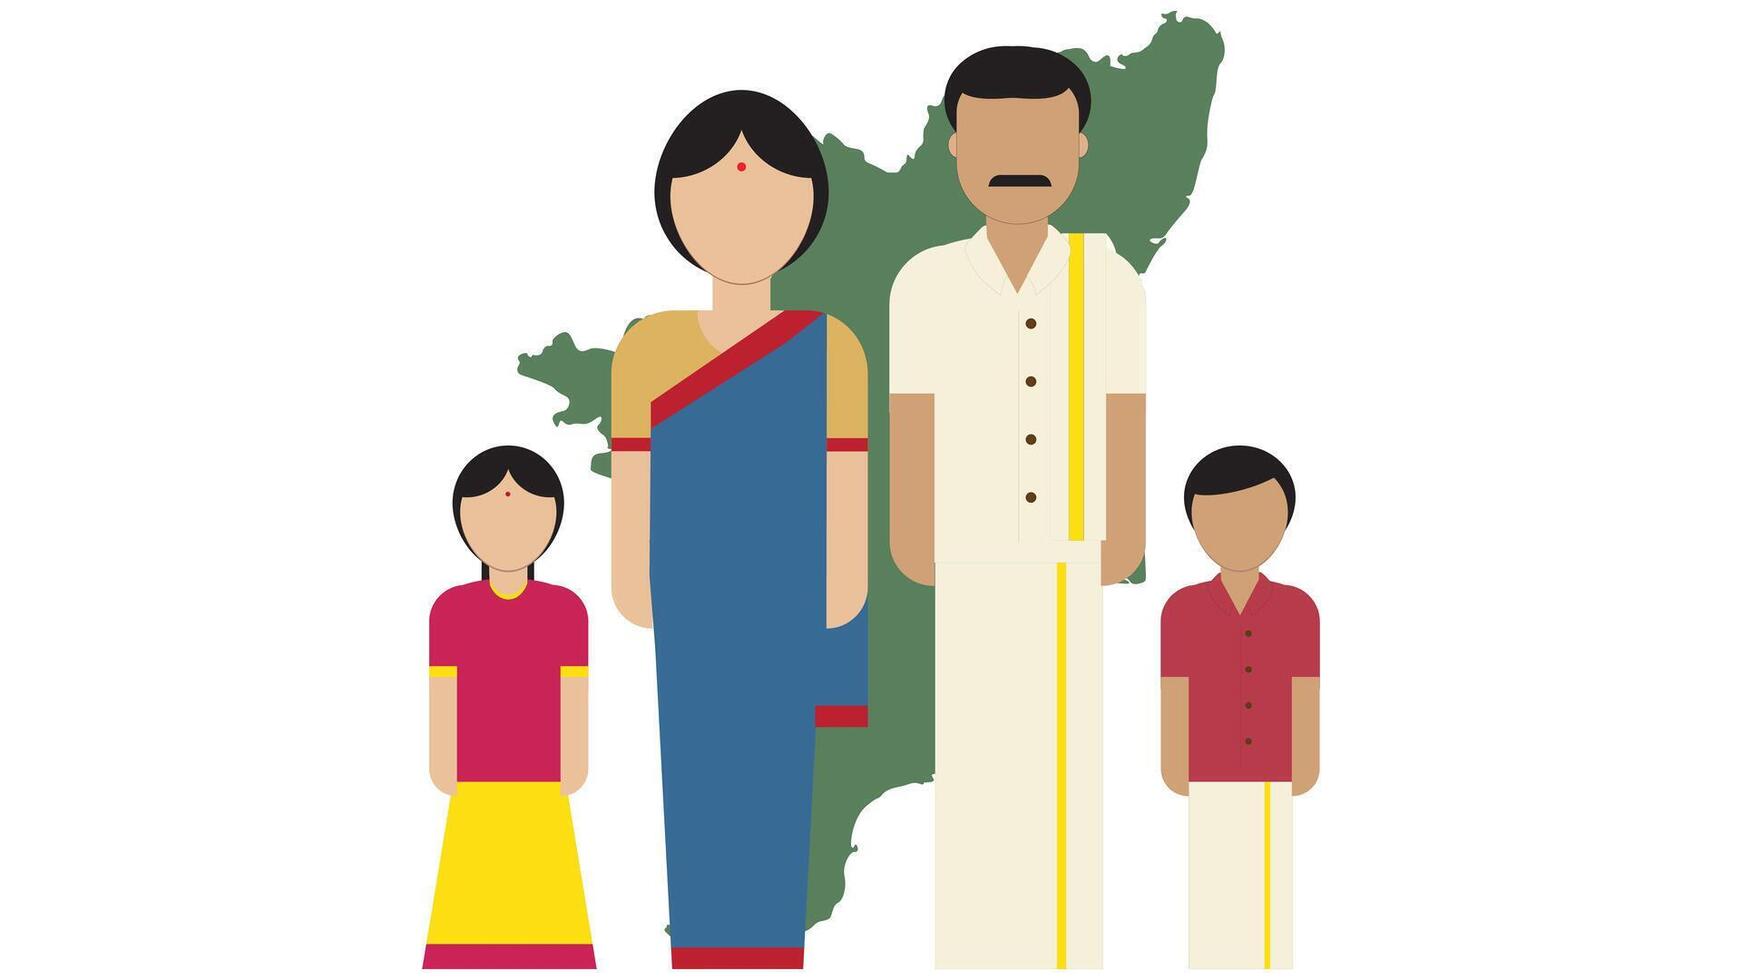 culture of Tamil Nadu , South Indian People culture vector illustration